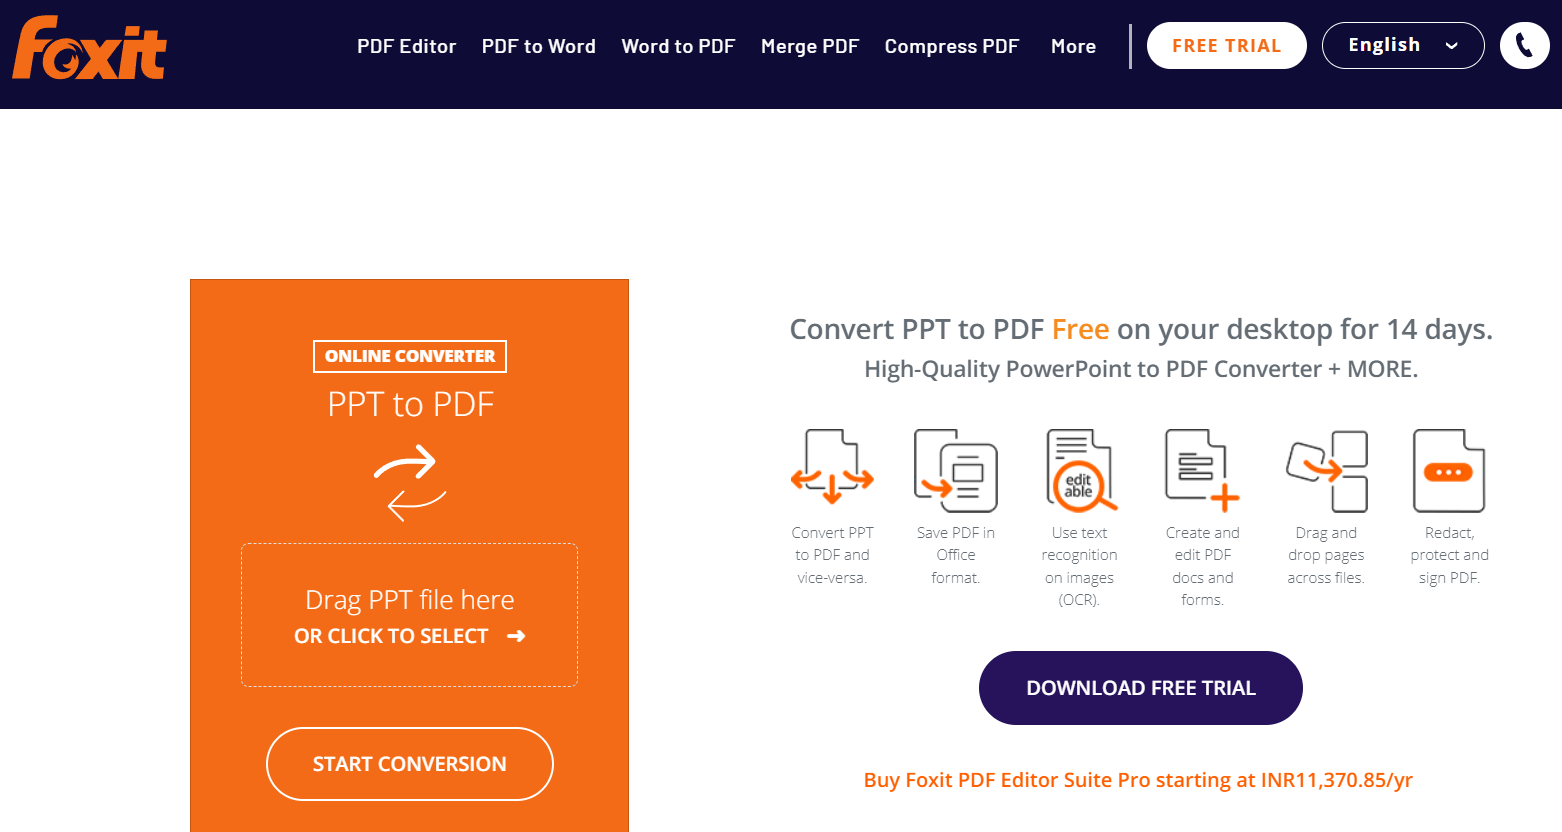 Foxit PPT to PDF